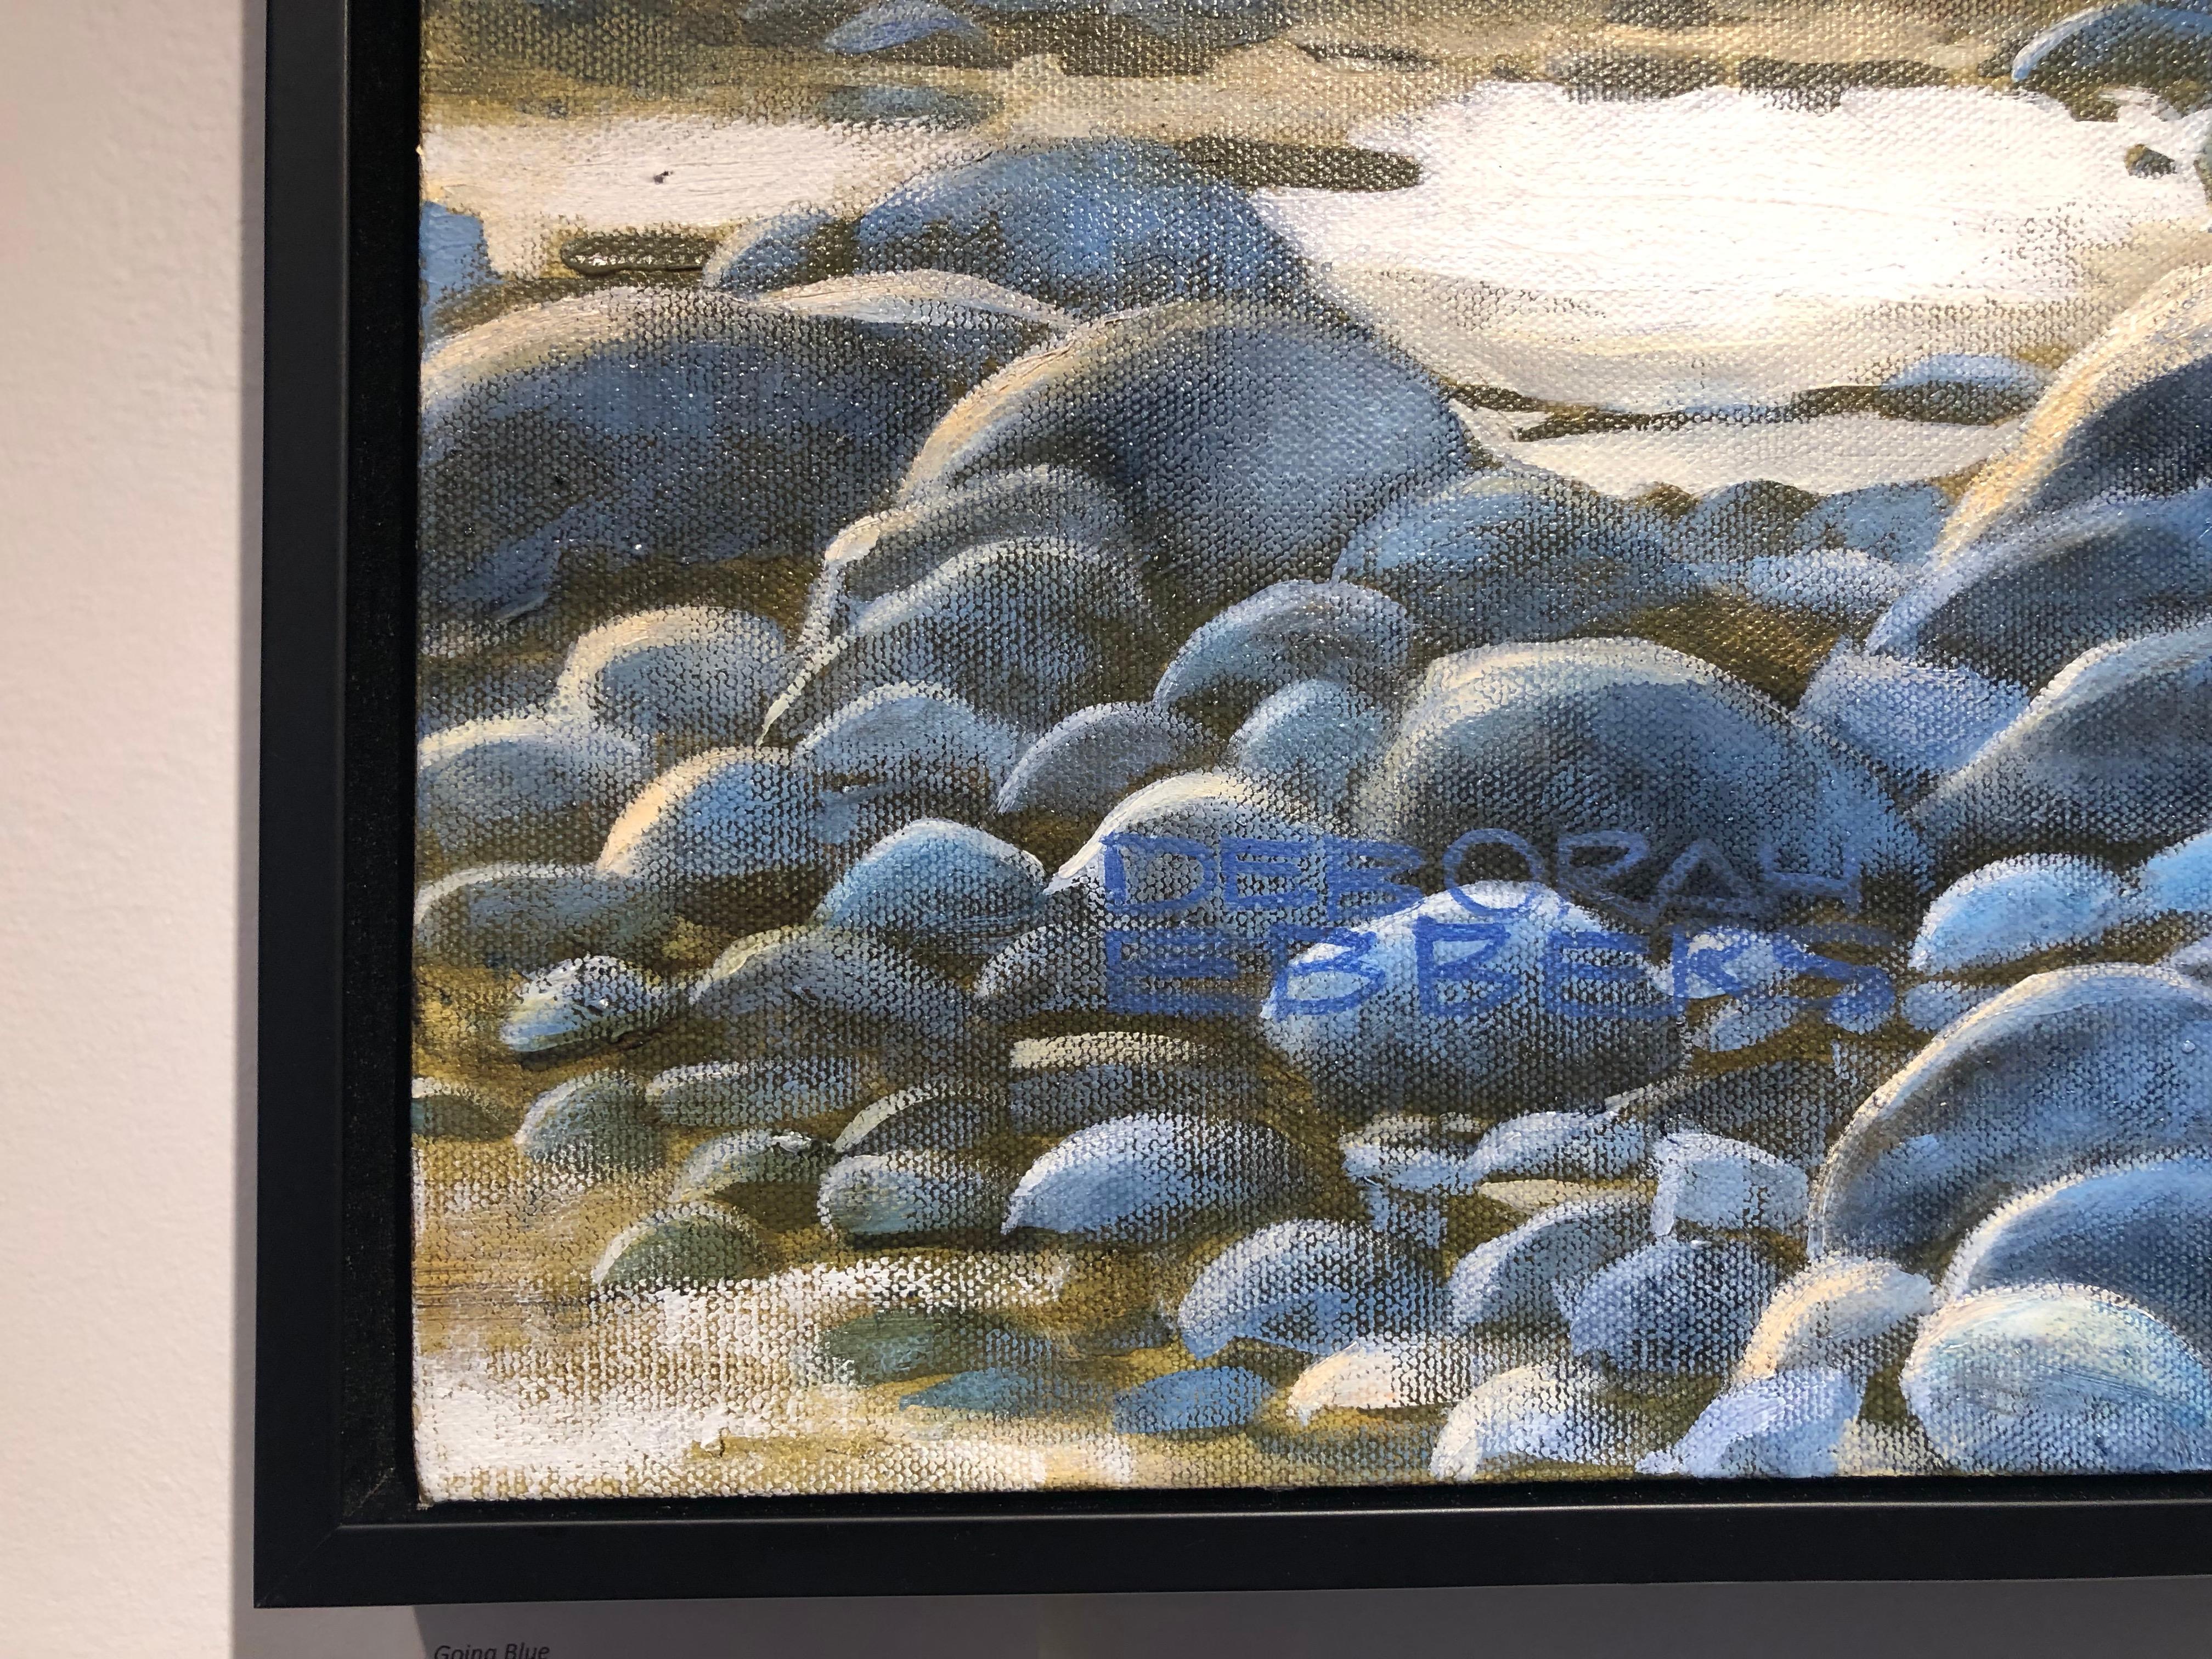 This oil on canvas painting of blue gray rocks and water lapping at the shore is beautifully painted in a representational style.  Upon close examination the brush strokes show an influence of impressionism.  The scene is saturated with bright